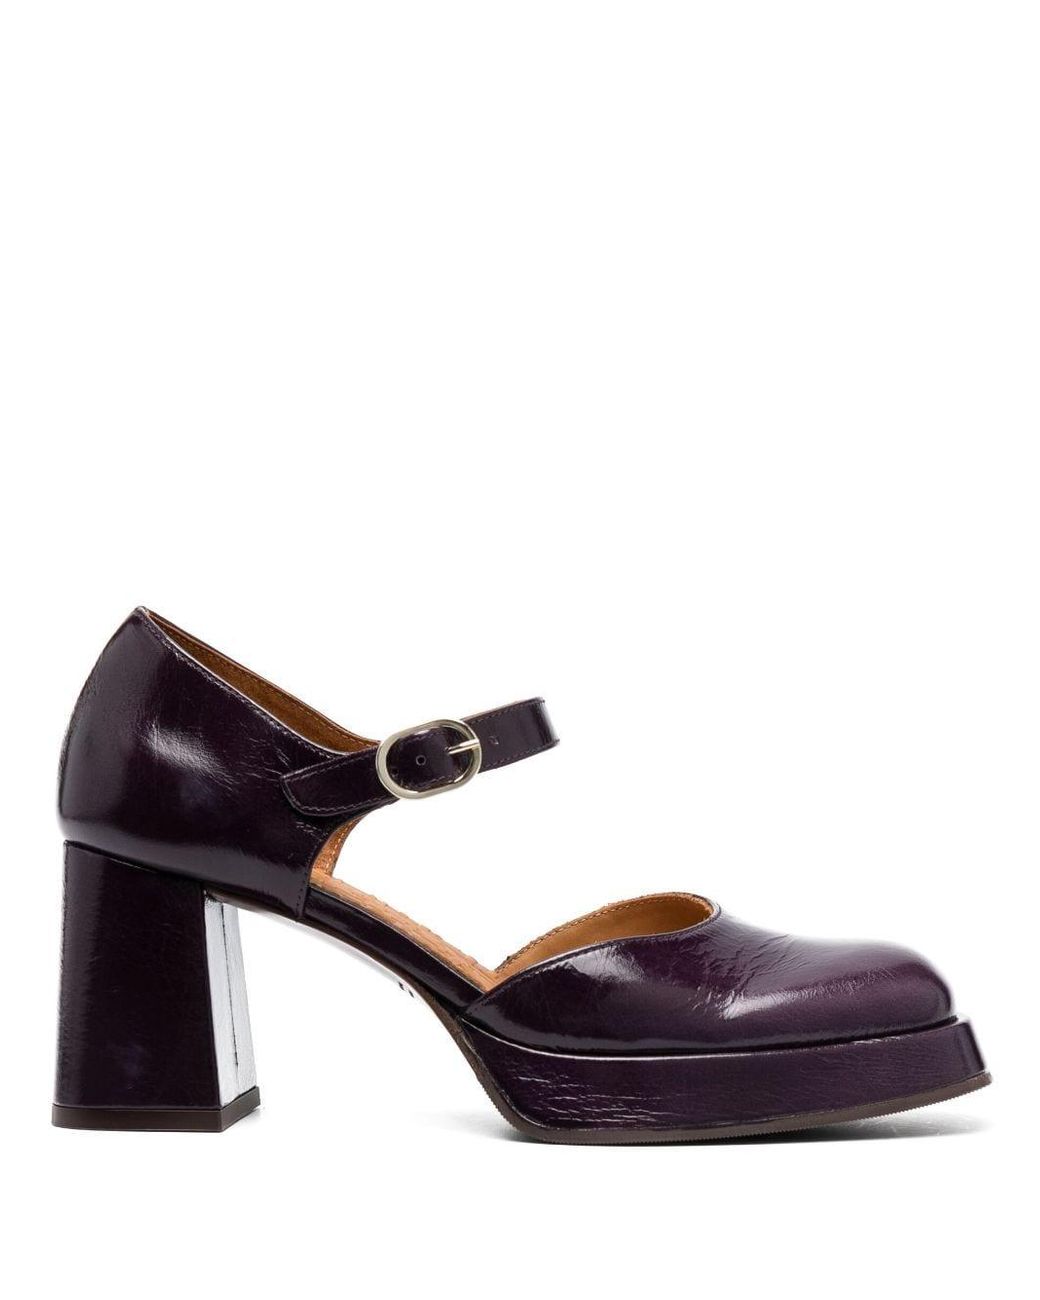 Chie Mihara Kento 65mm Patent-finish Pumps in Purple | Lyst